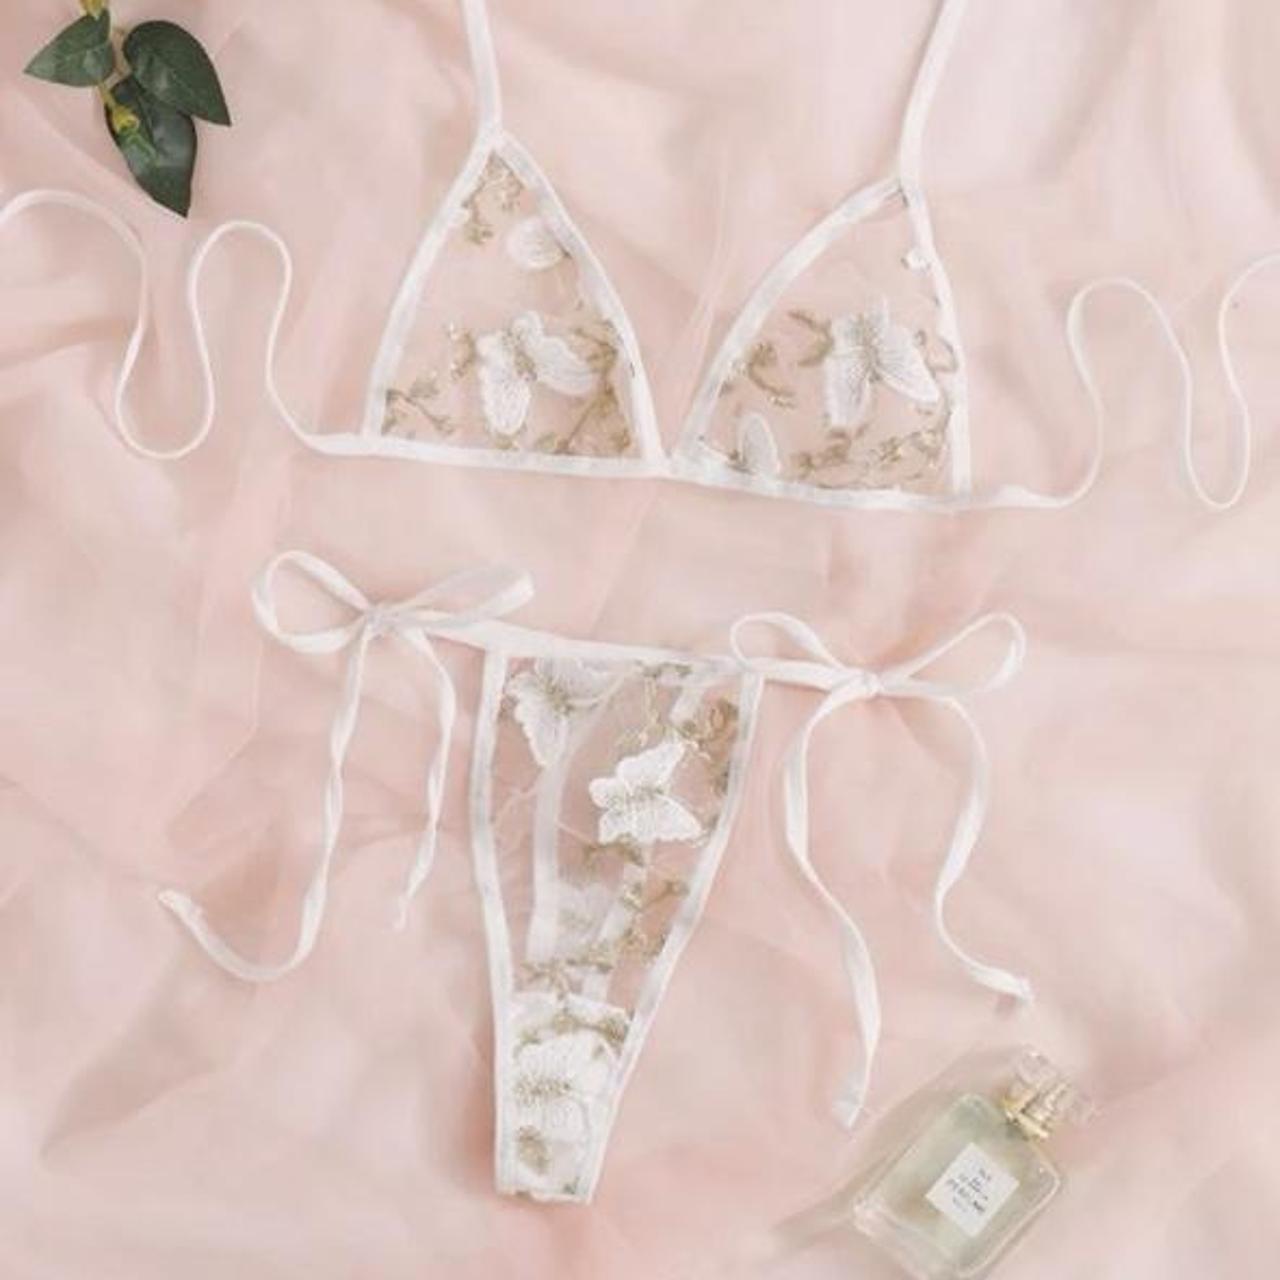 Is That The New Embroidered Floral Sheer Mesh Lingerie Set ??